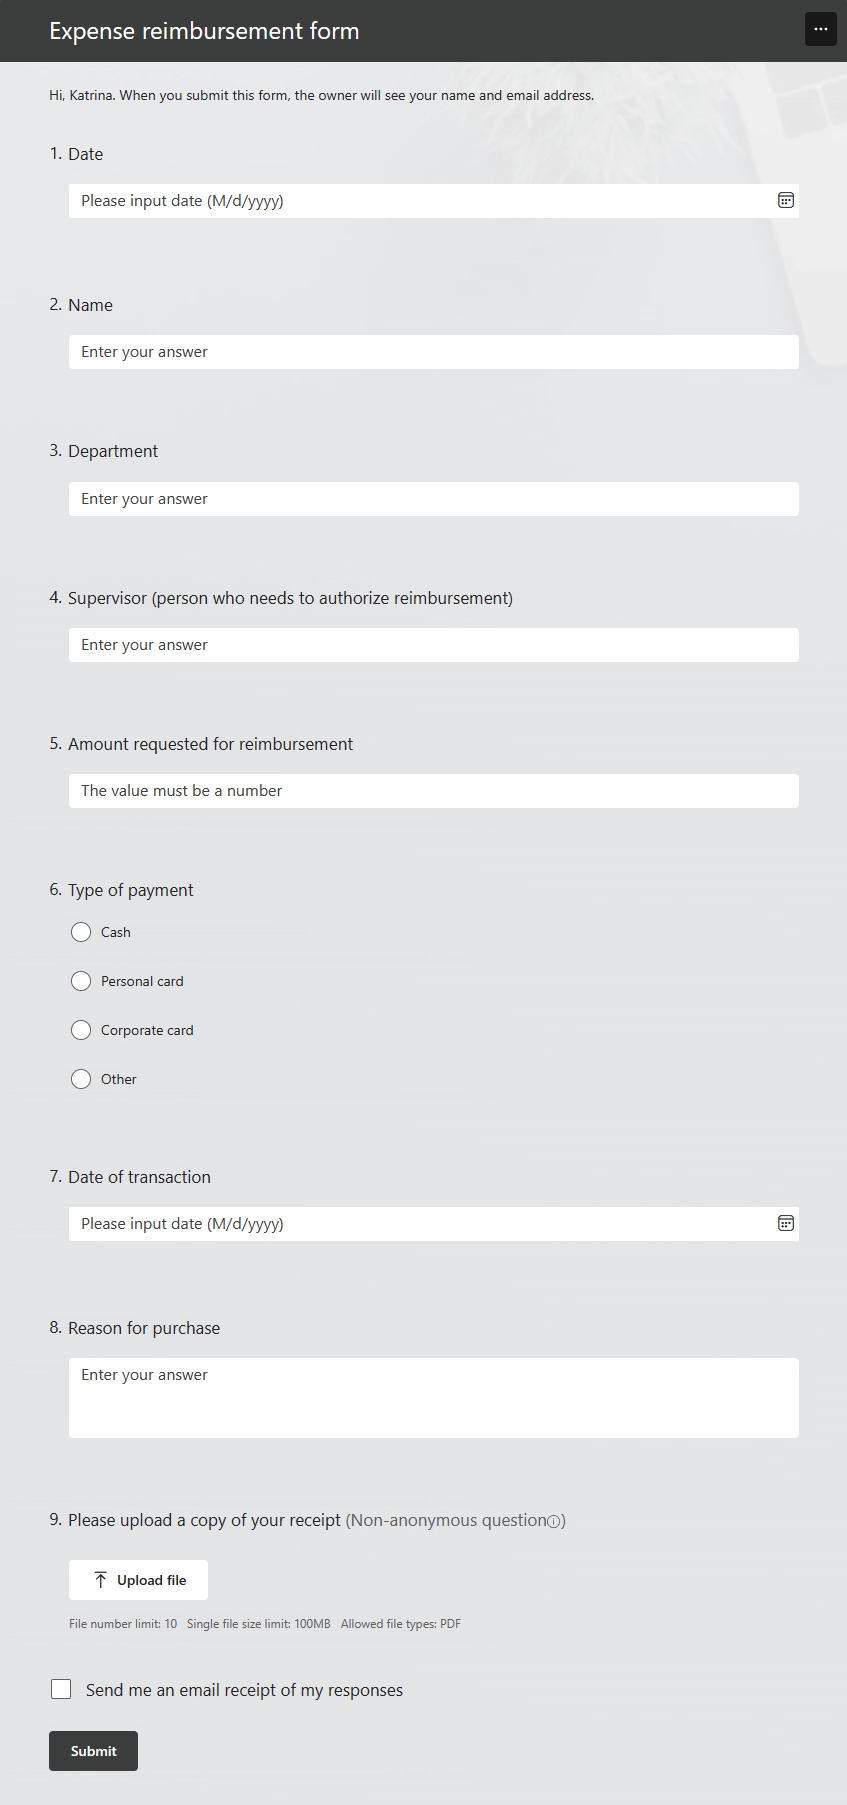 Microsoft form with attachment fields